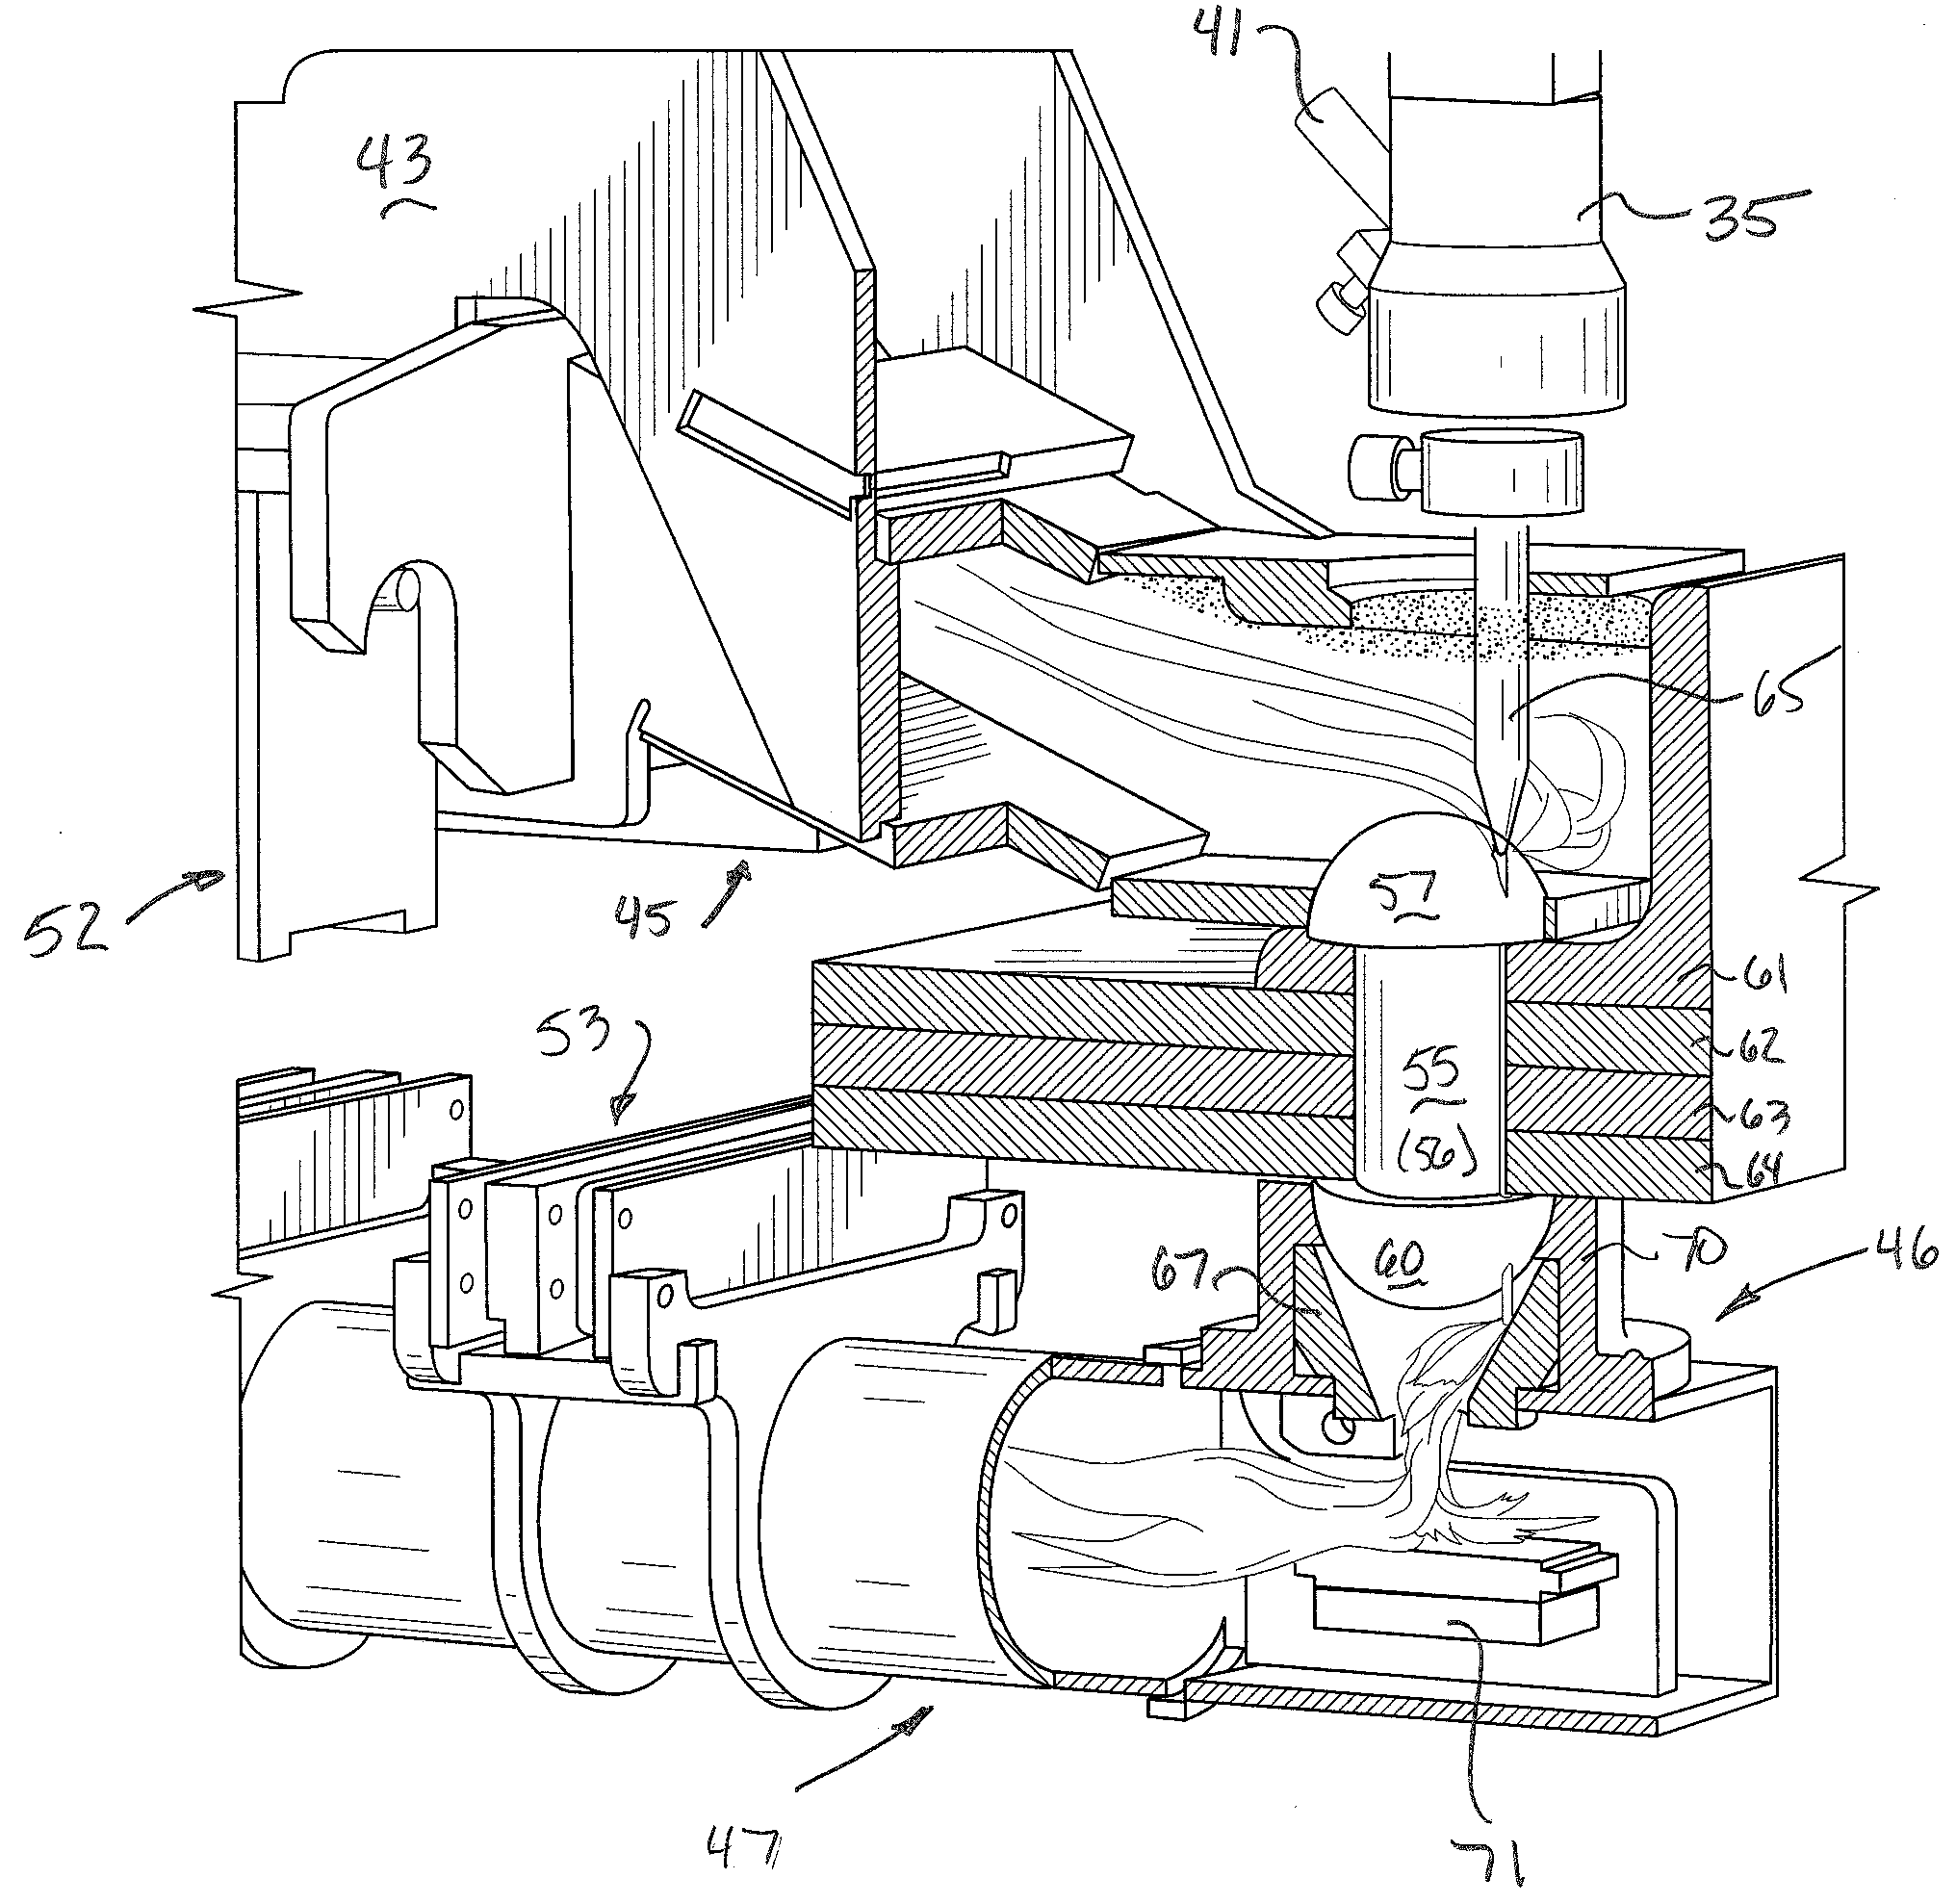 Method and apparatus for rivet removal and in-situ rehabilitation of large metal structures